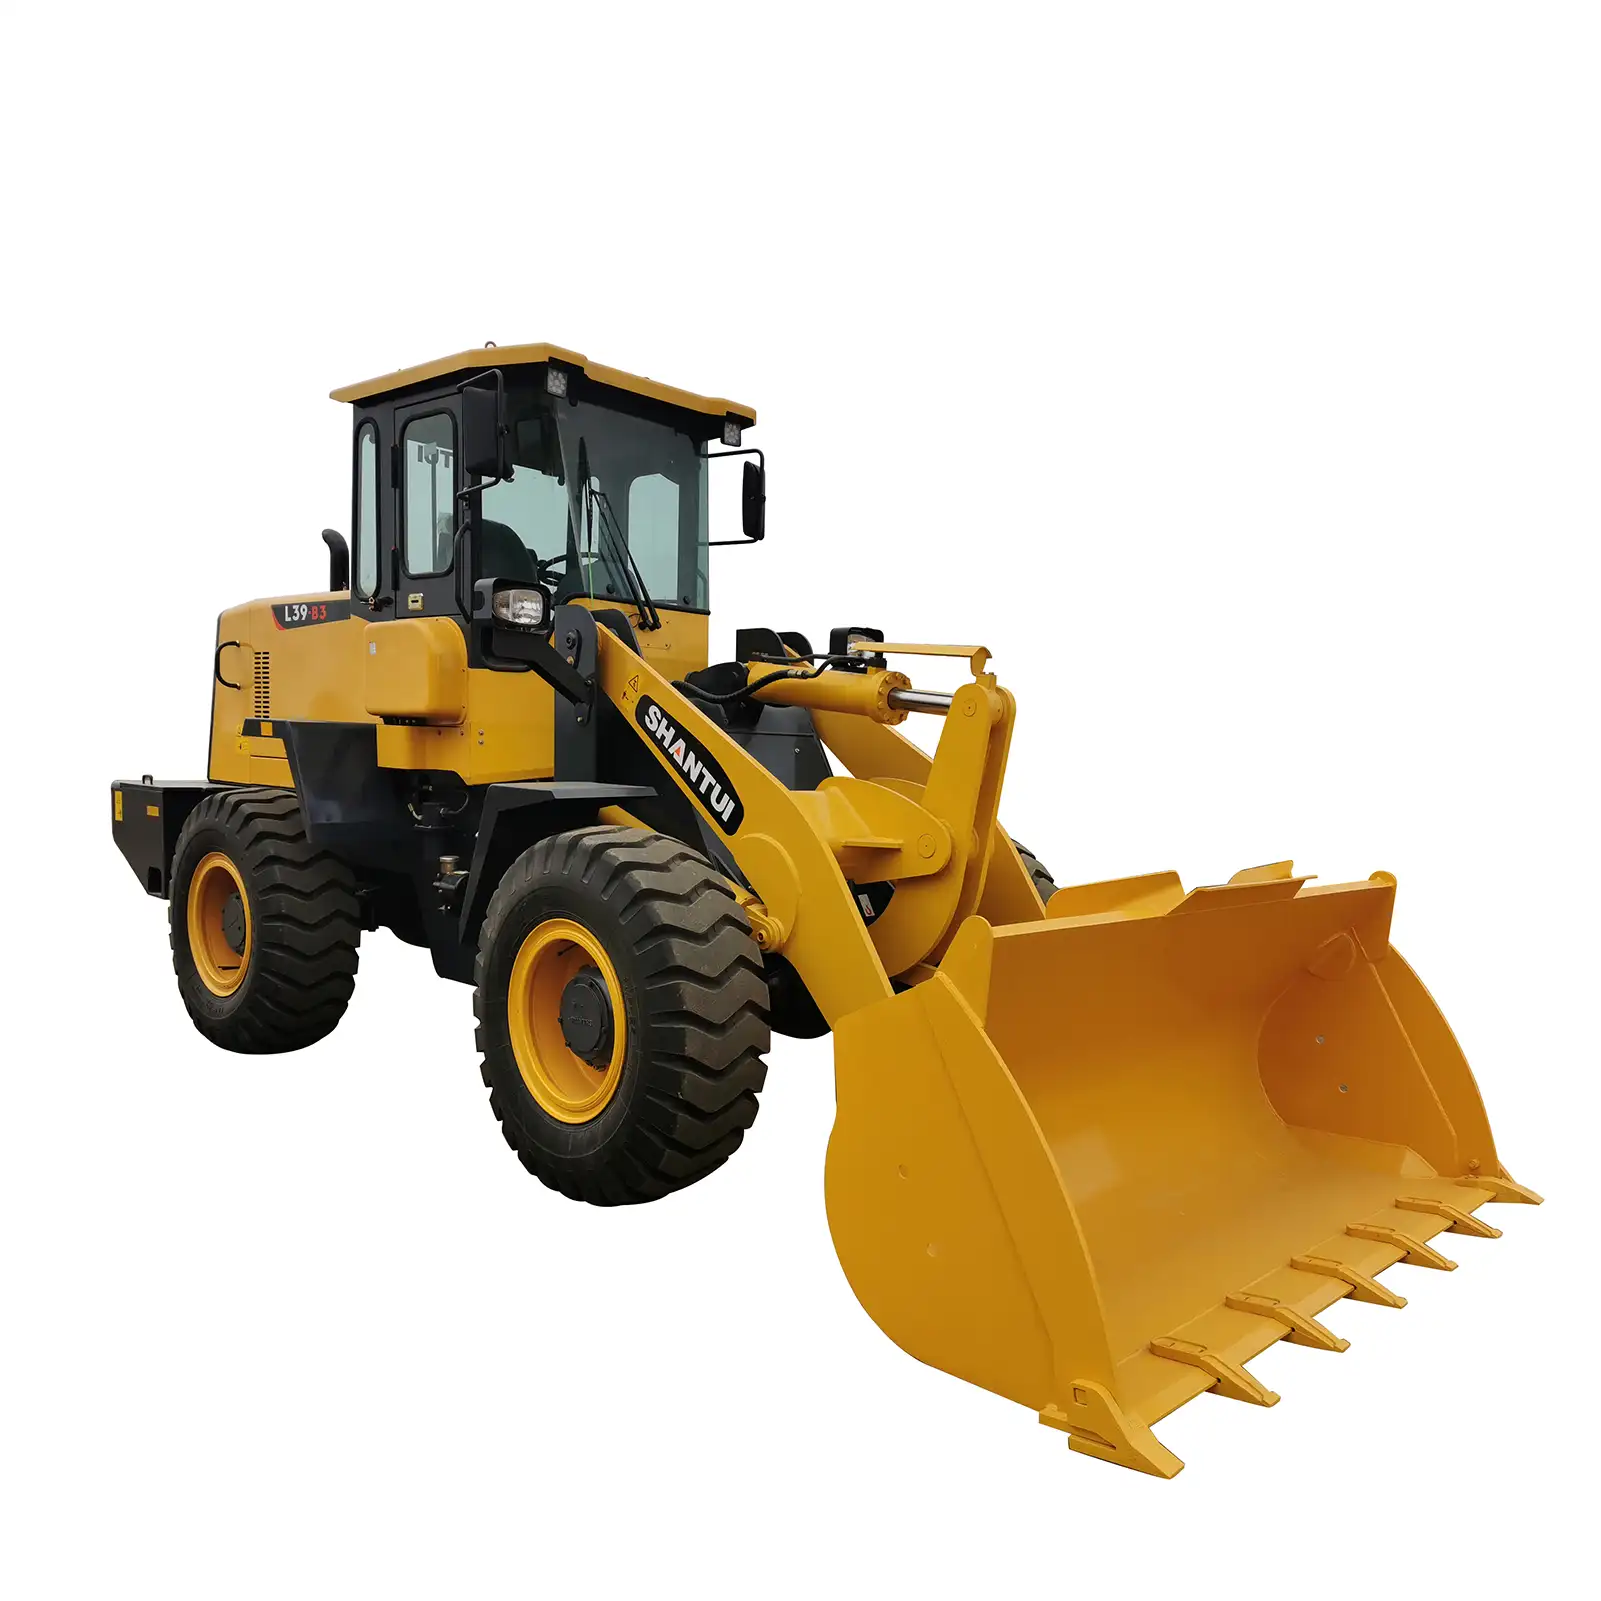 China Professional Manufacturer Wheel Loader With 6 Ton Load 3.7 CBM Bucket For Sale In United Arab Emirates